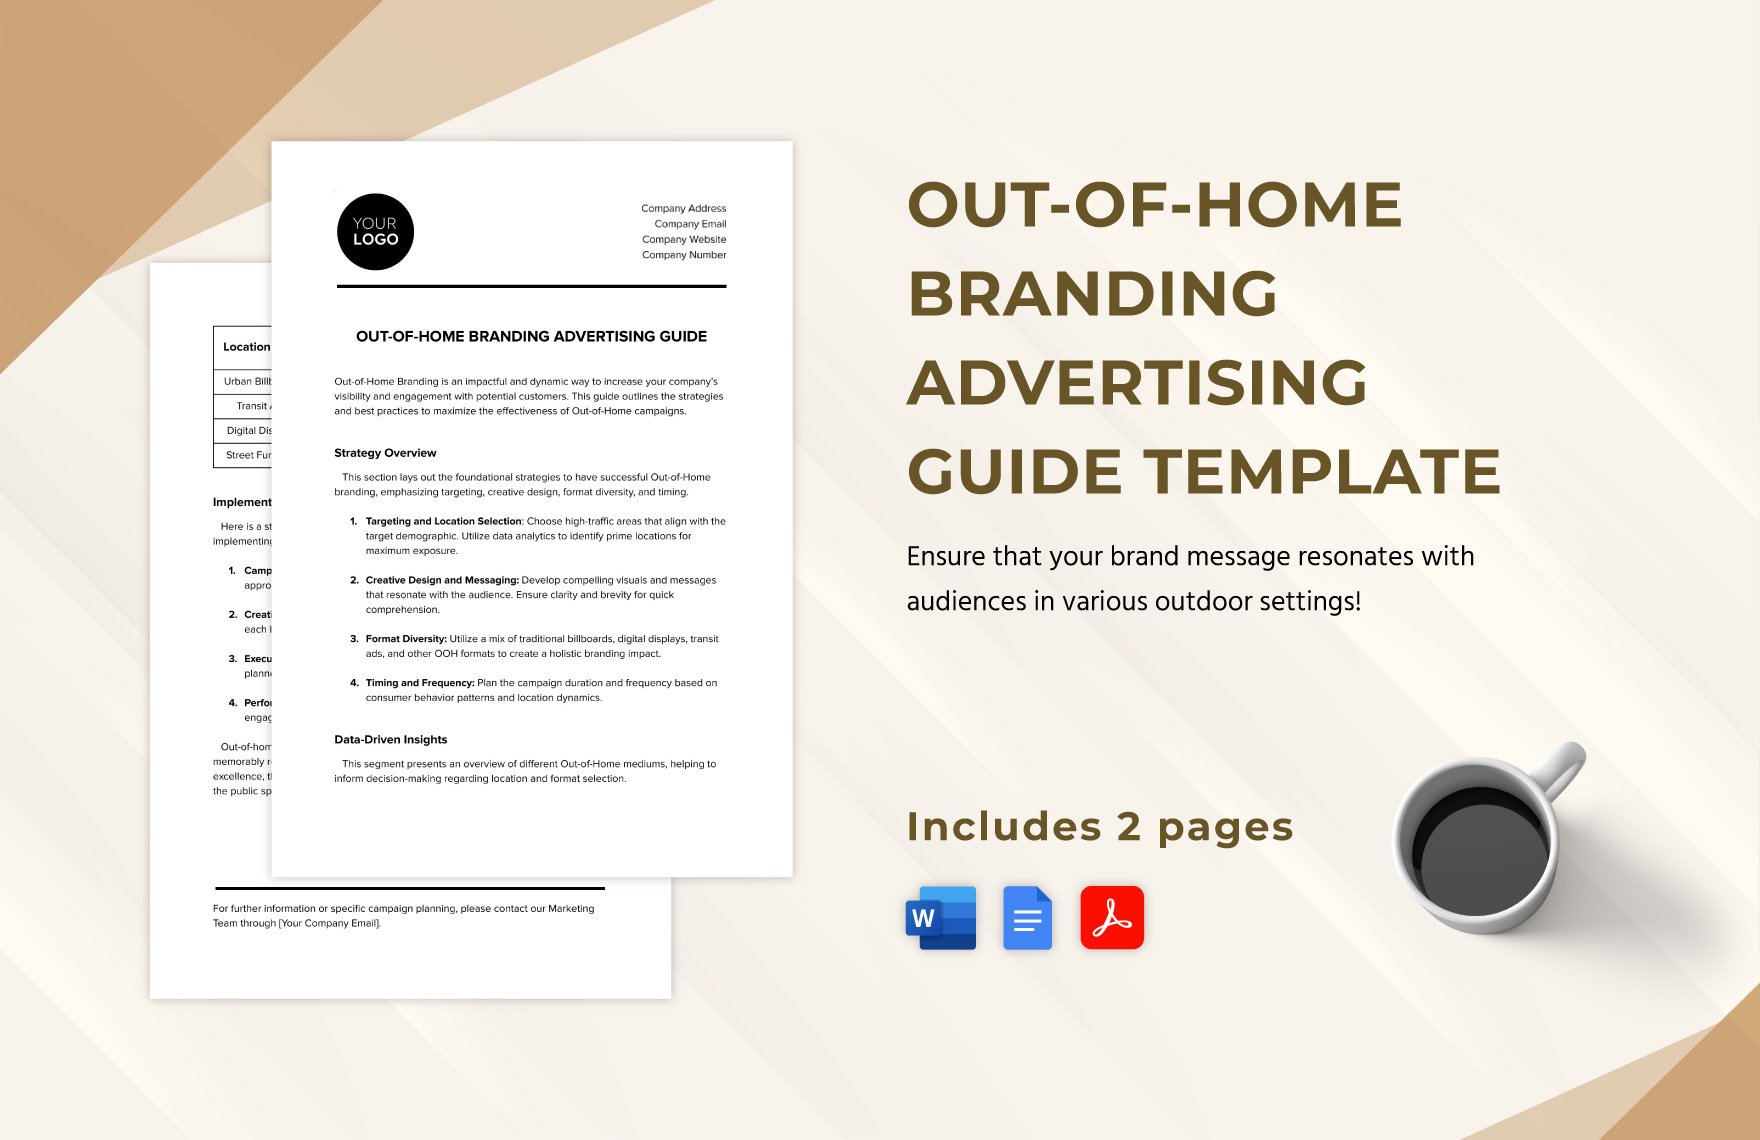 Out-of-Home Branding Advertising Guide Template